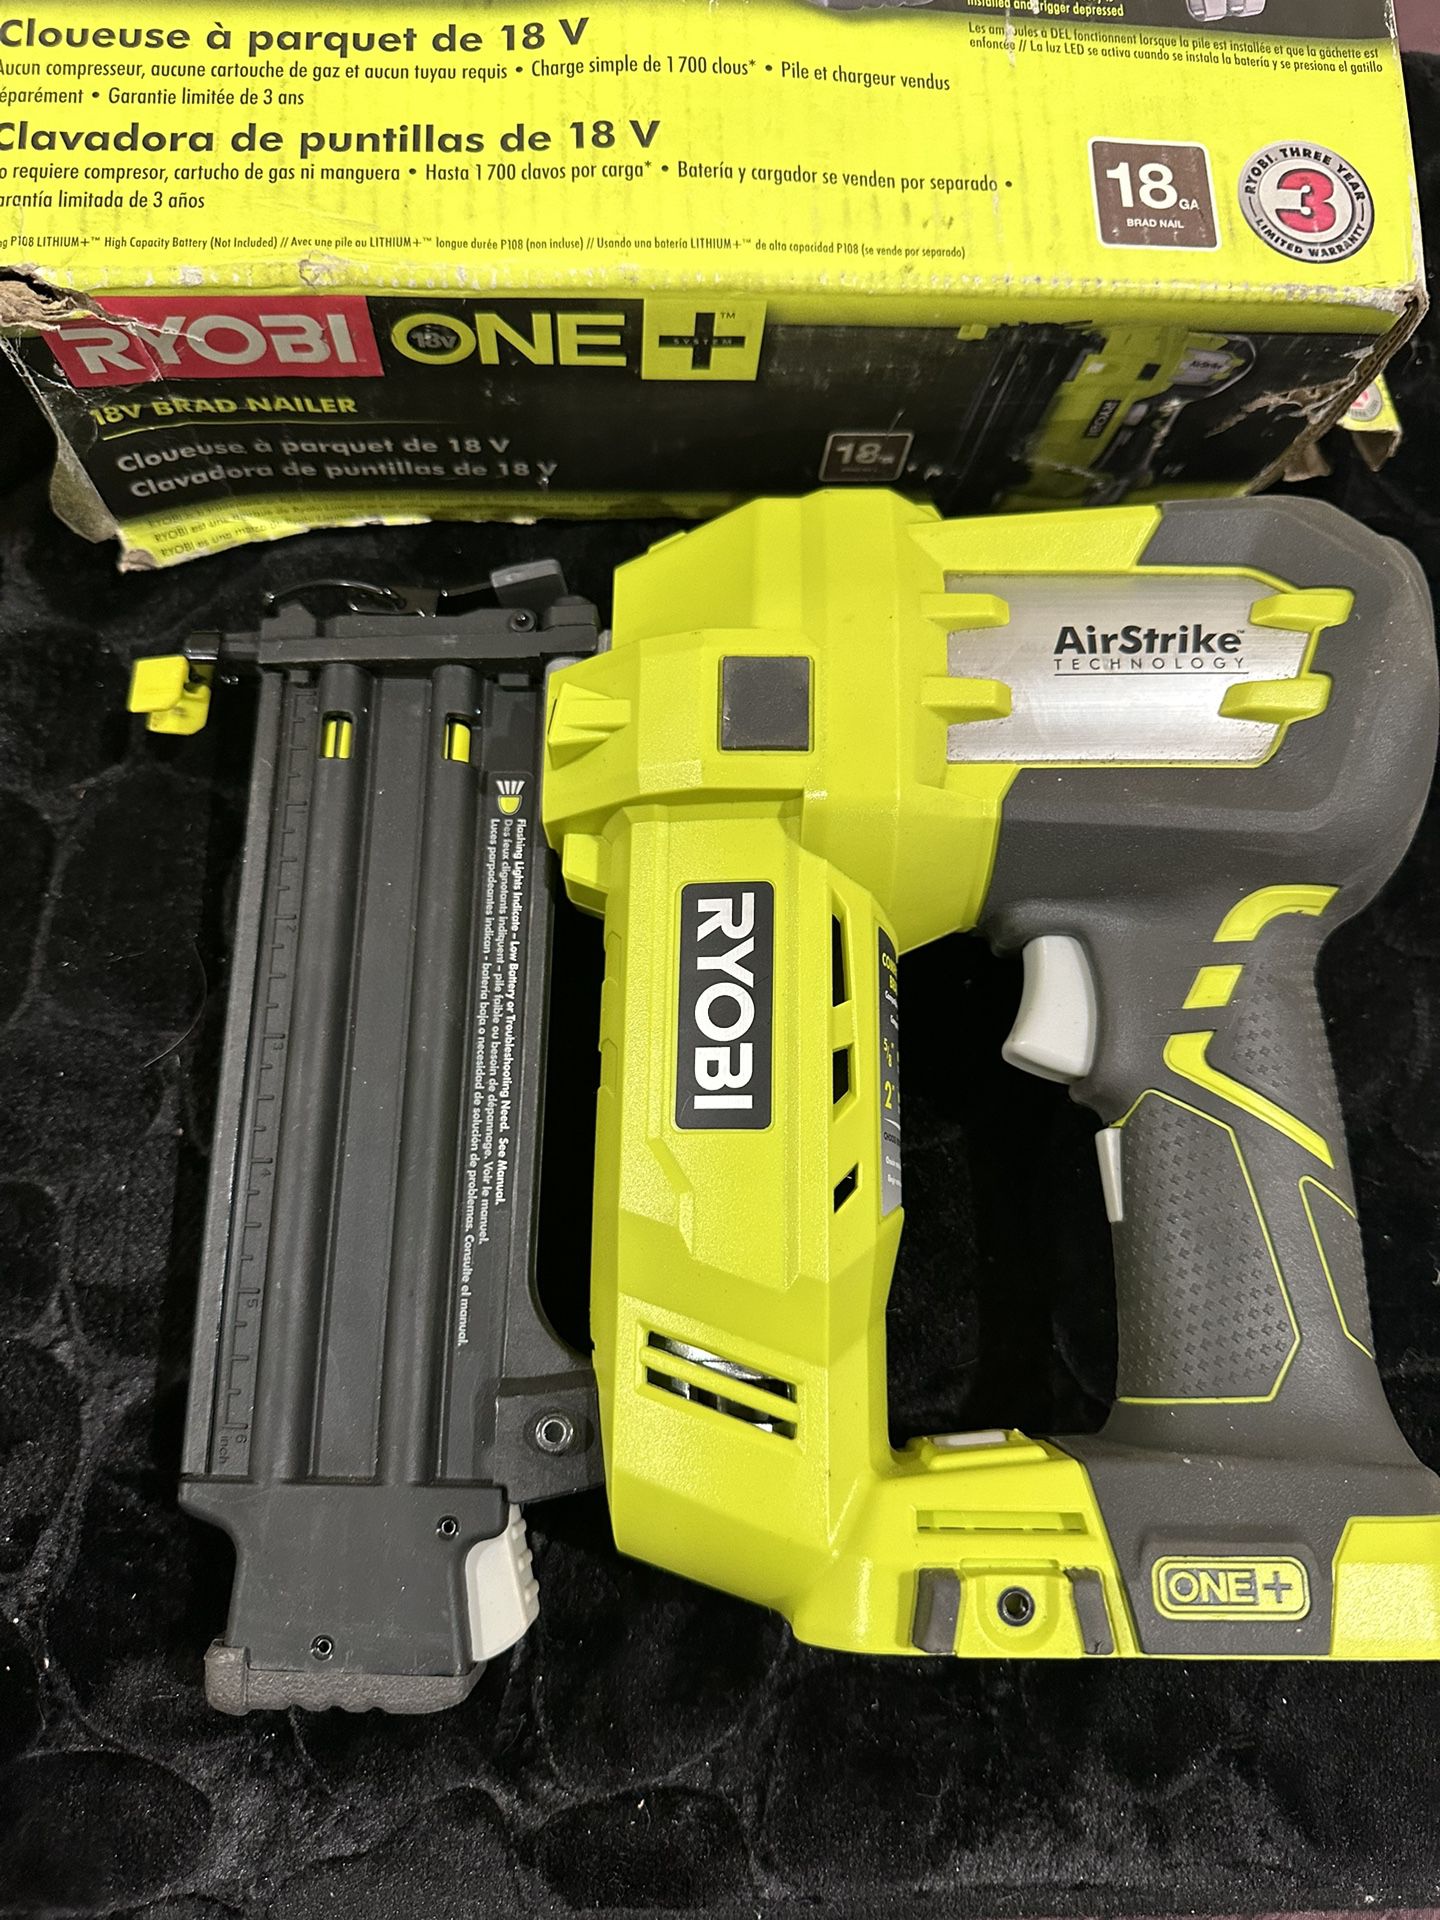 New Ryobi ONE+ 18V Cordless AirStrike 18-Gauge Brad Nailer (Tool Only) with  Sample Nails for Sale in Garden Grove, CA OfferUp